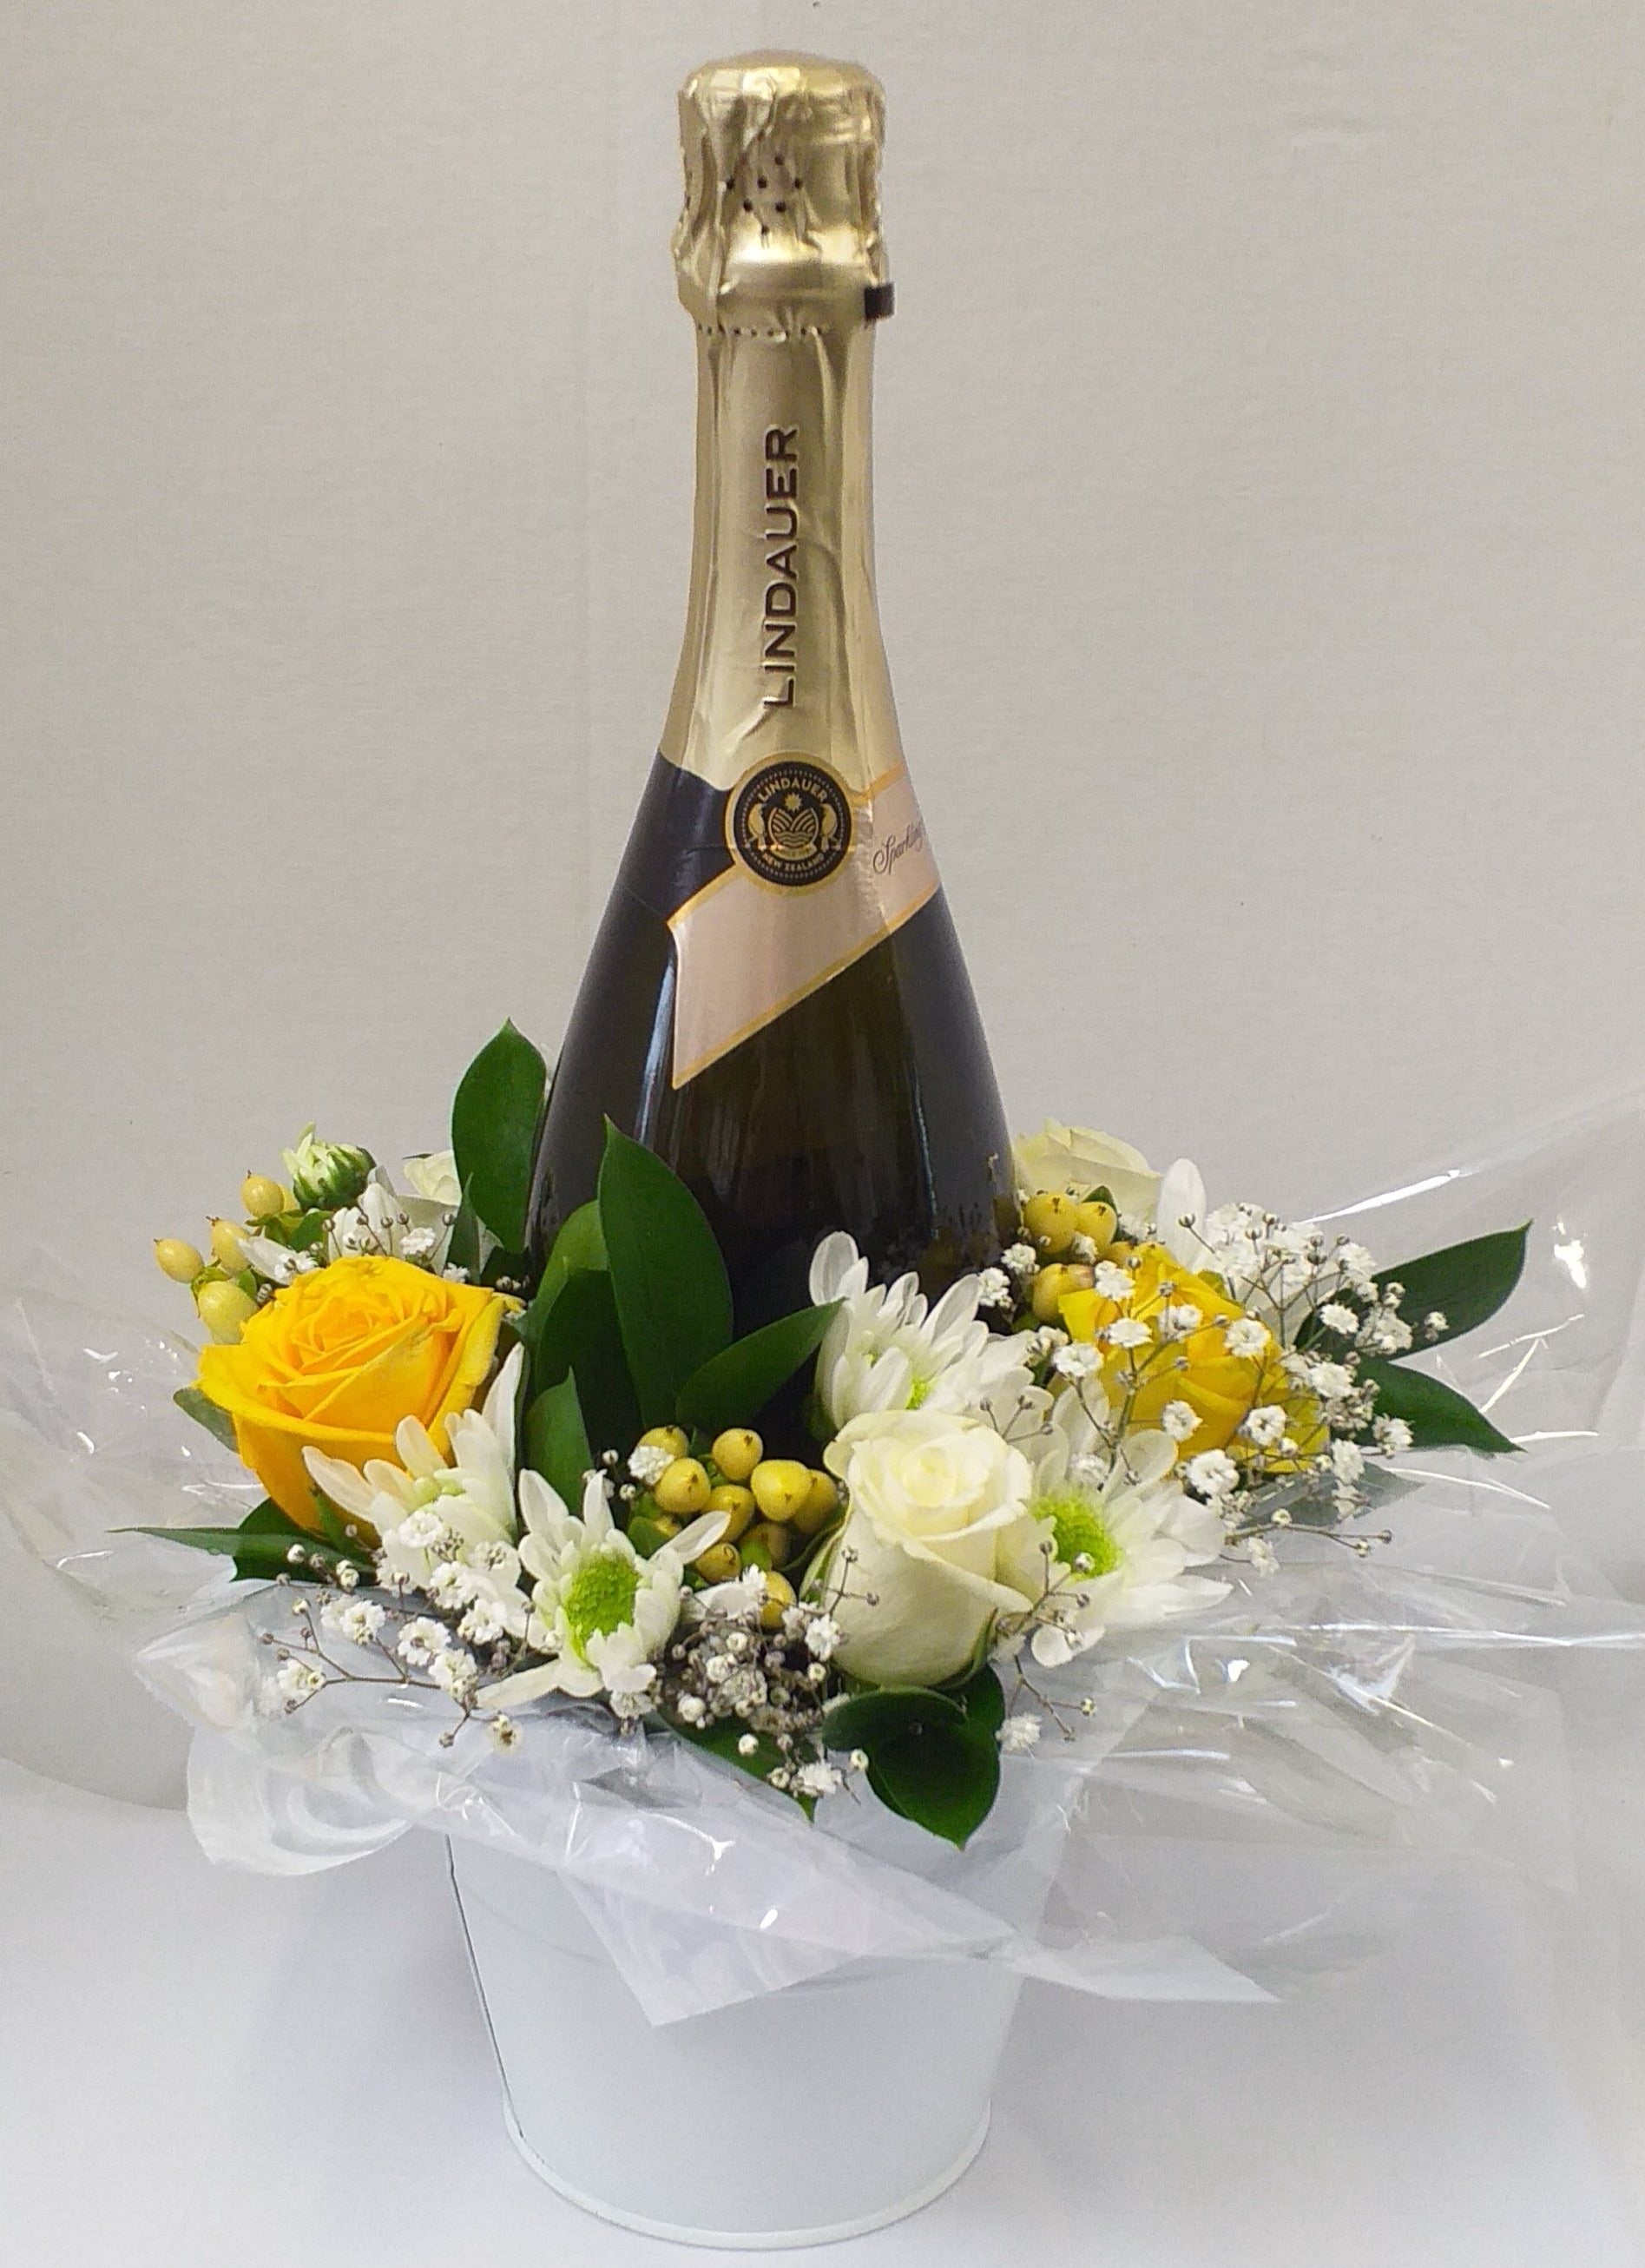 Gift box or bucket of wine and flowers, you tell us what you want and we go and buy it for you